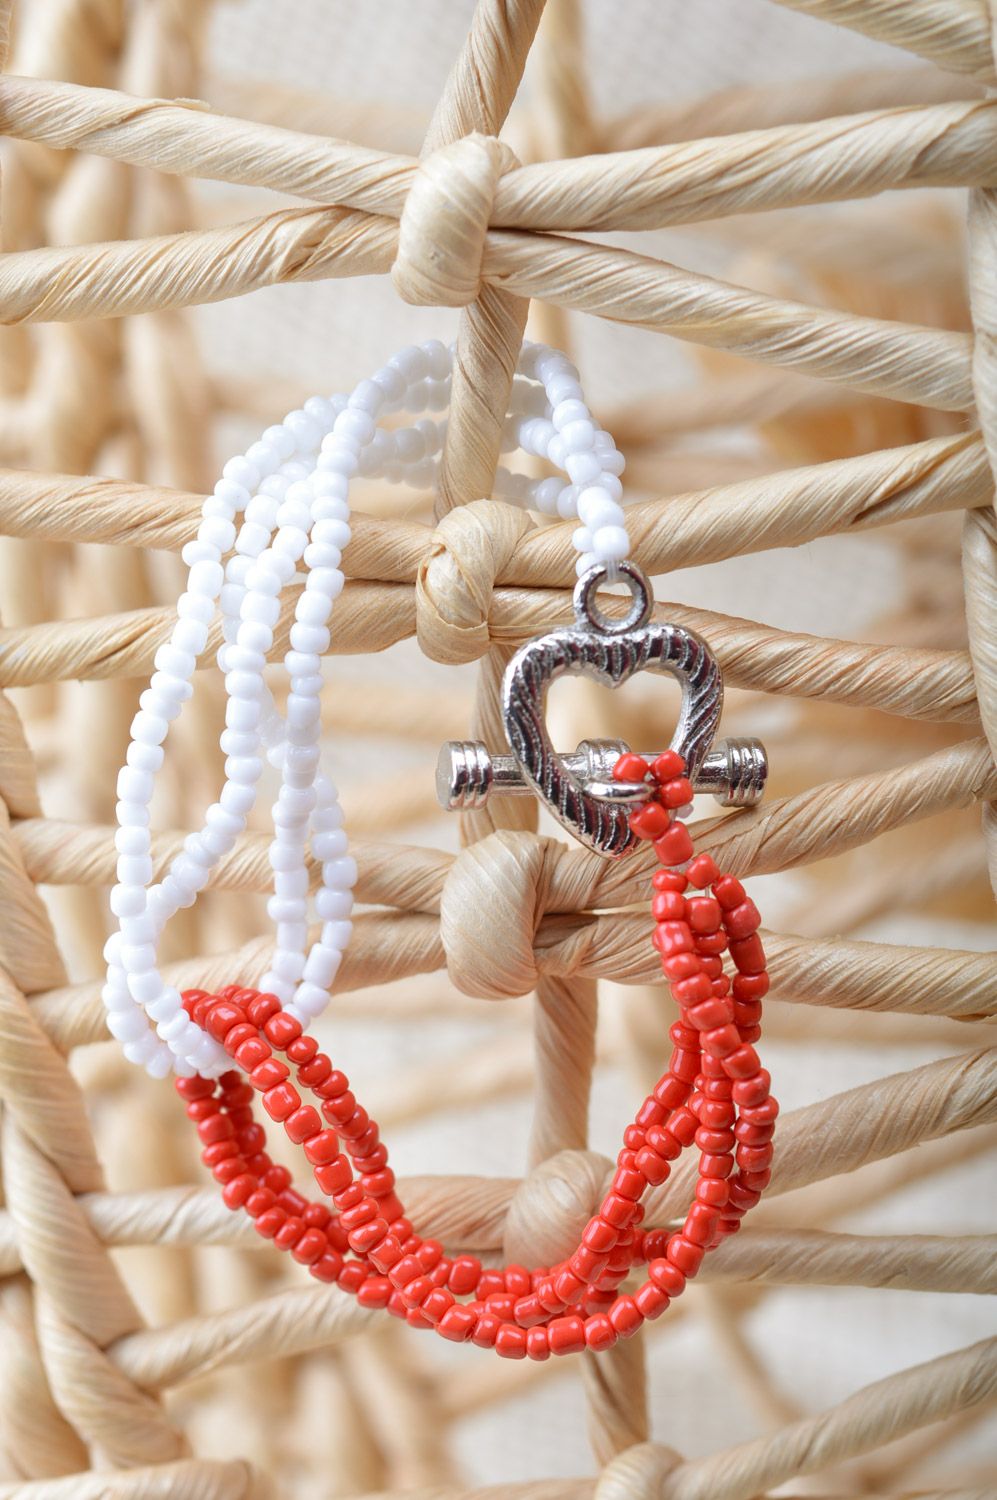 Thin homemade wrist bracelet woven of red and white Czech beads for women photo 5